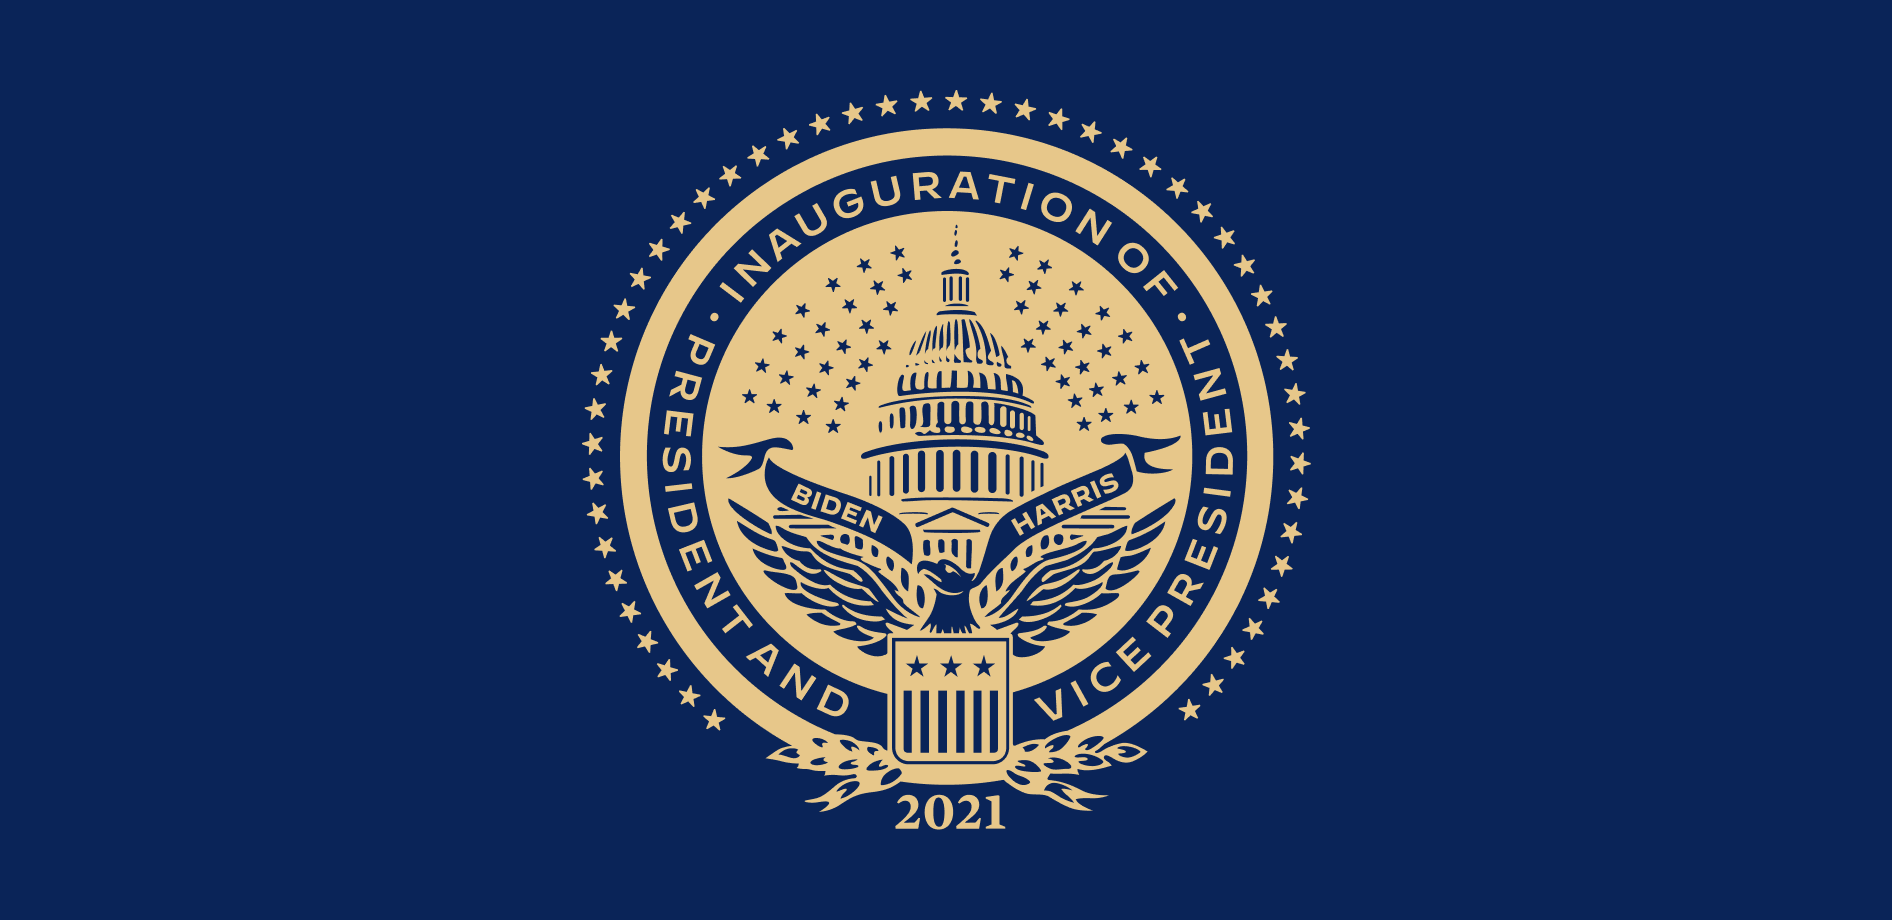 Inauguration of President and Vice President 2021 gold logo on blue background